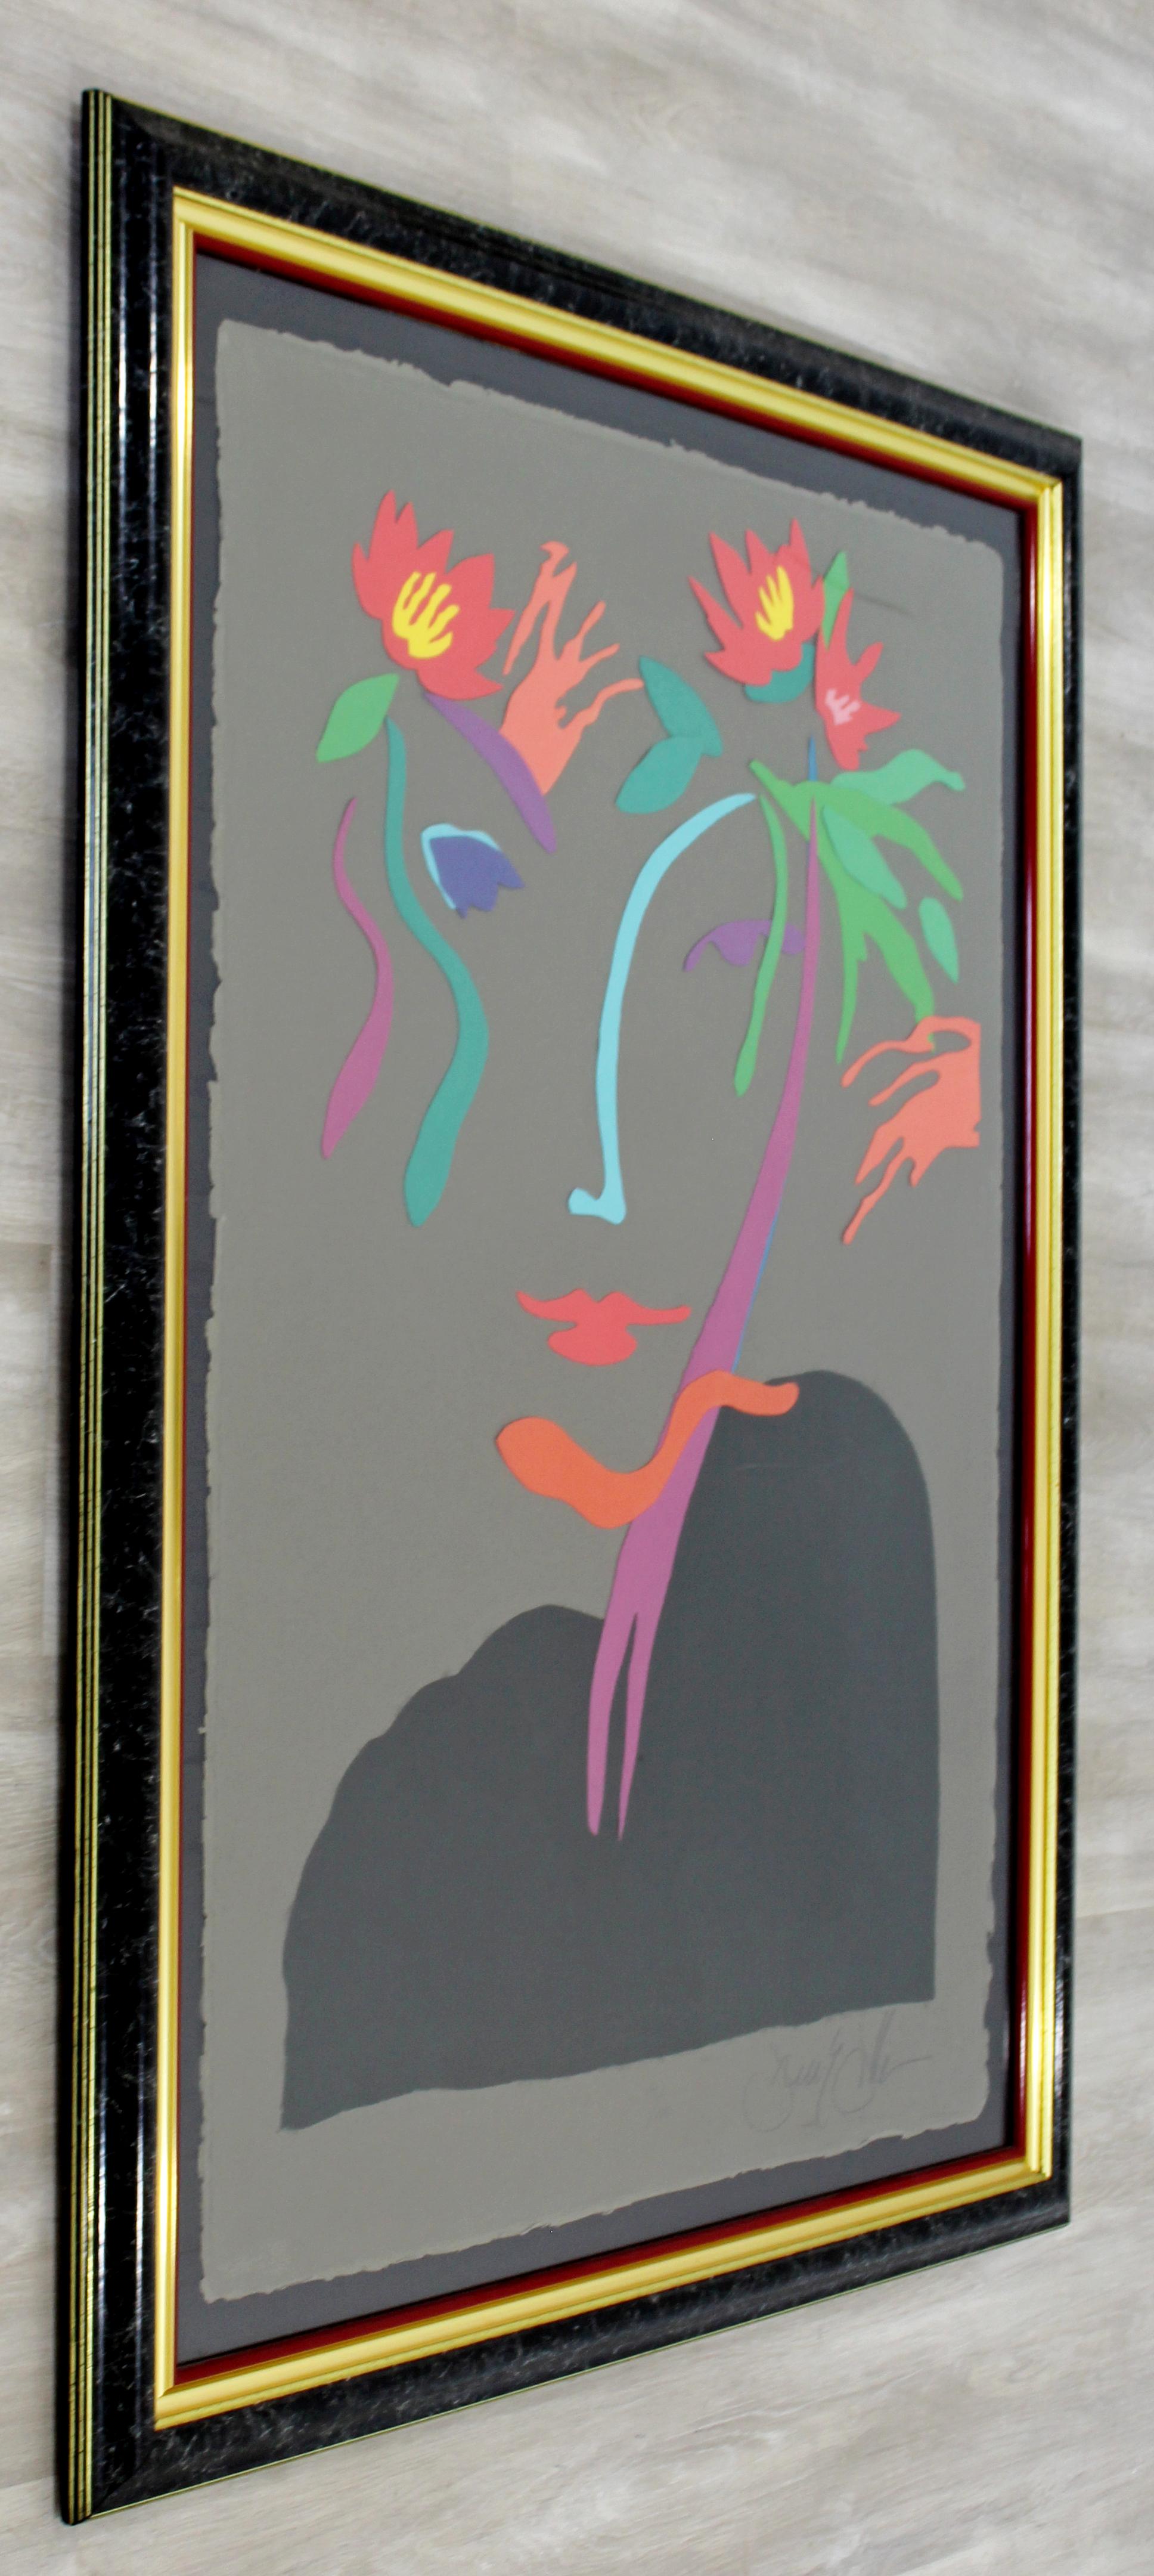 For your consideration is a beautiful, framed paper collage portrait, signed by Frank Gallo, entitled 